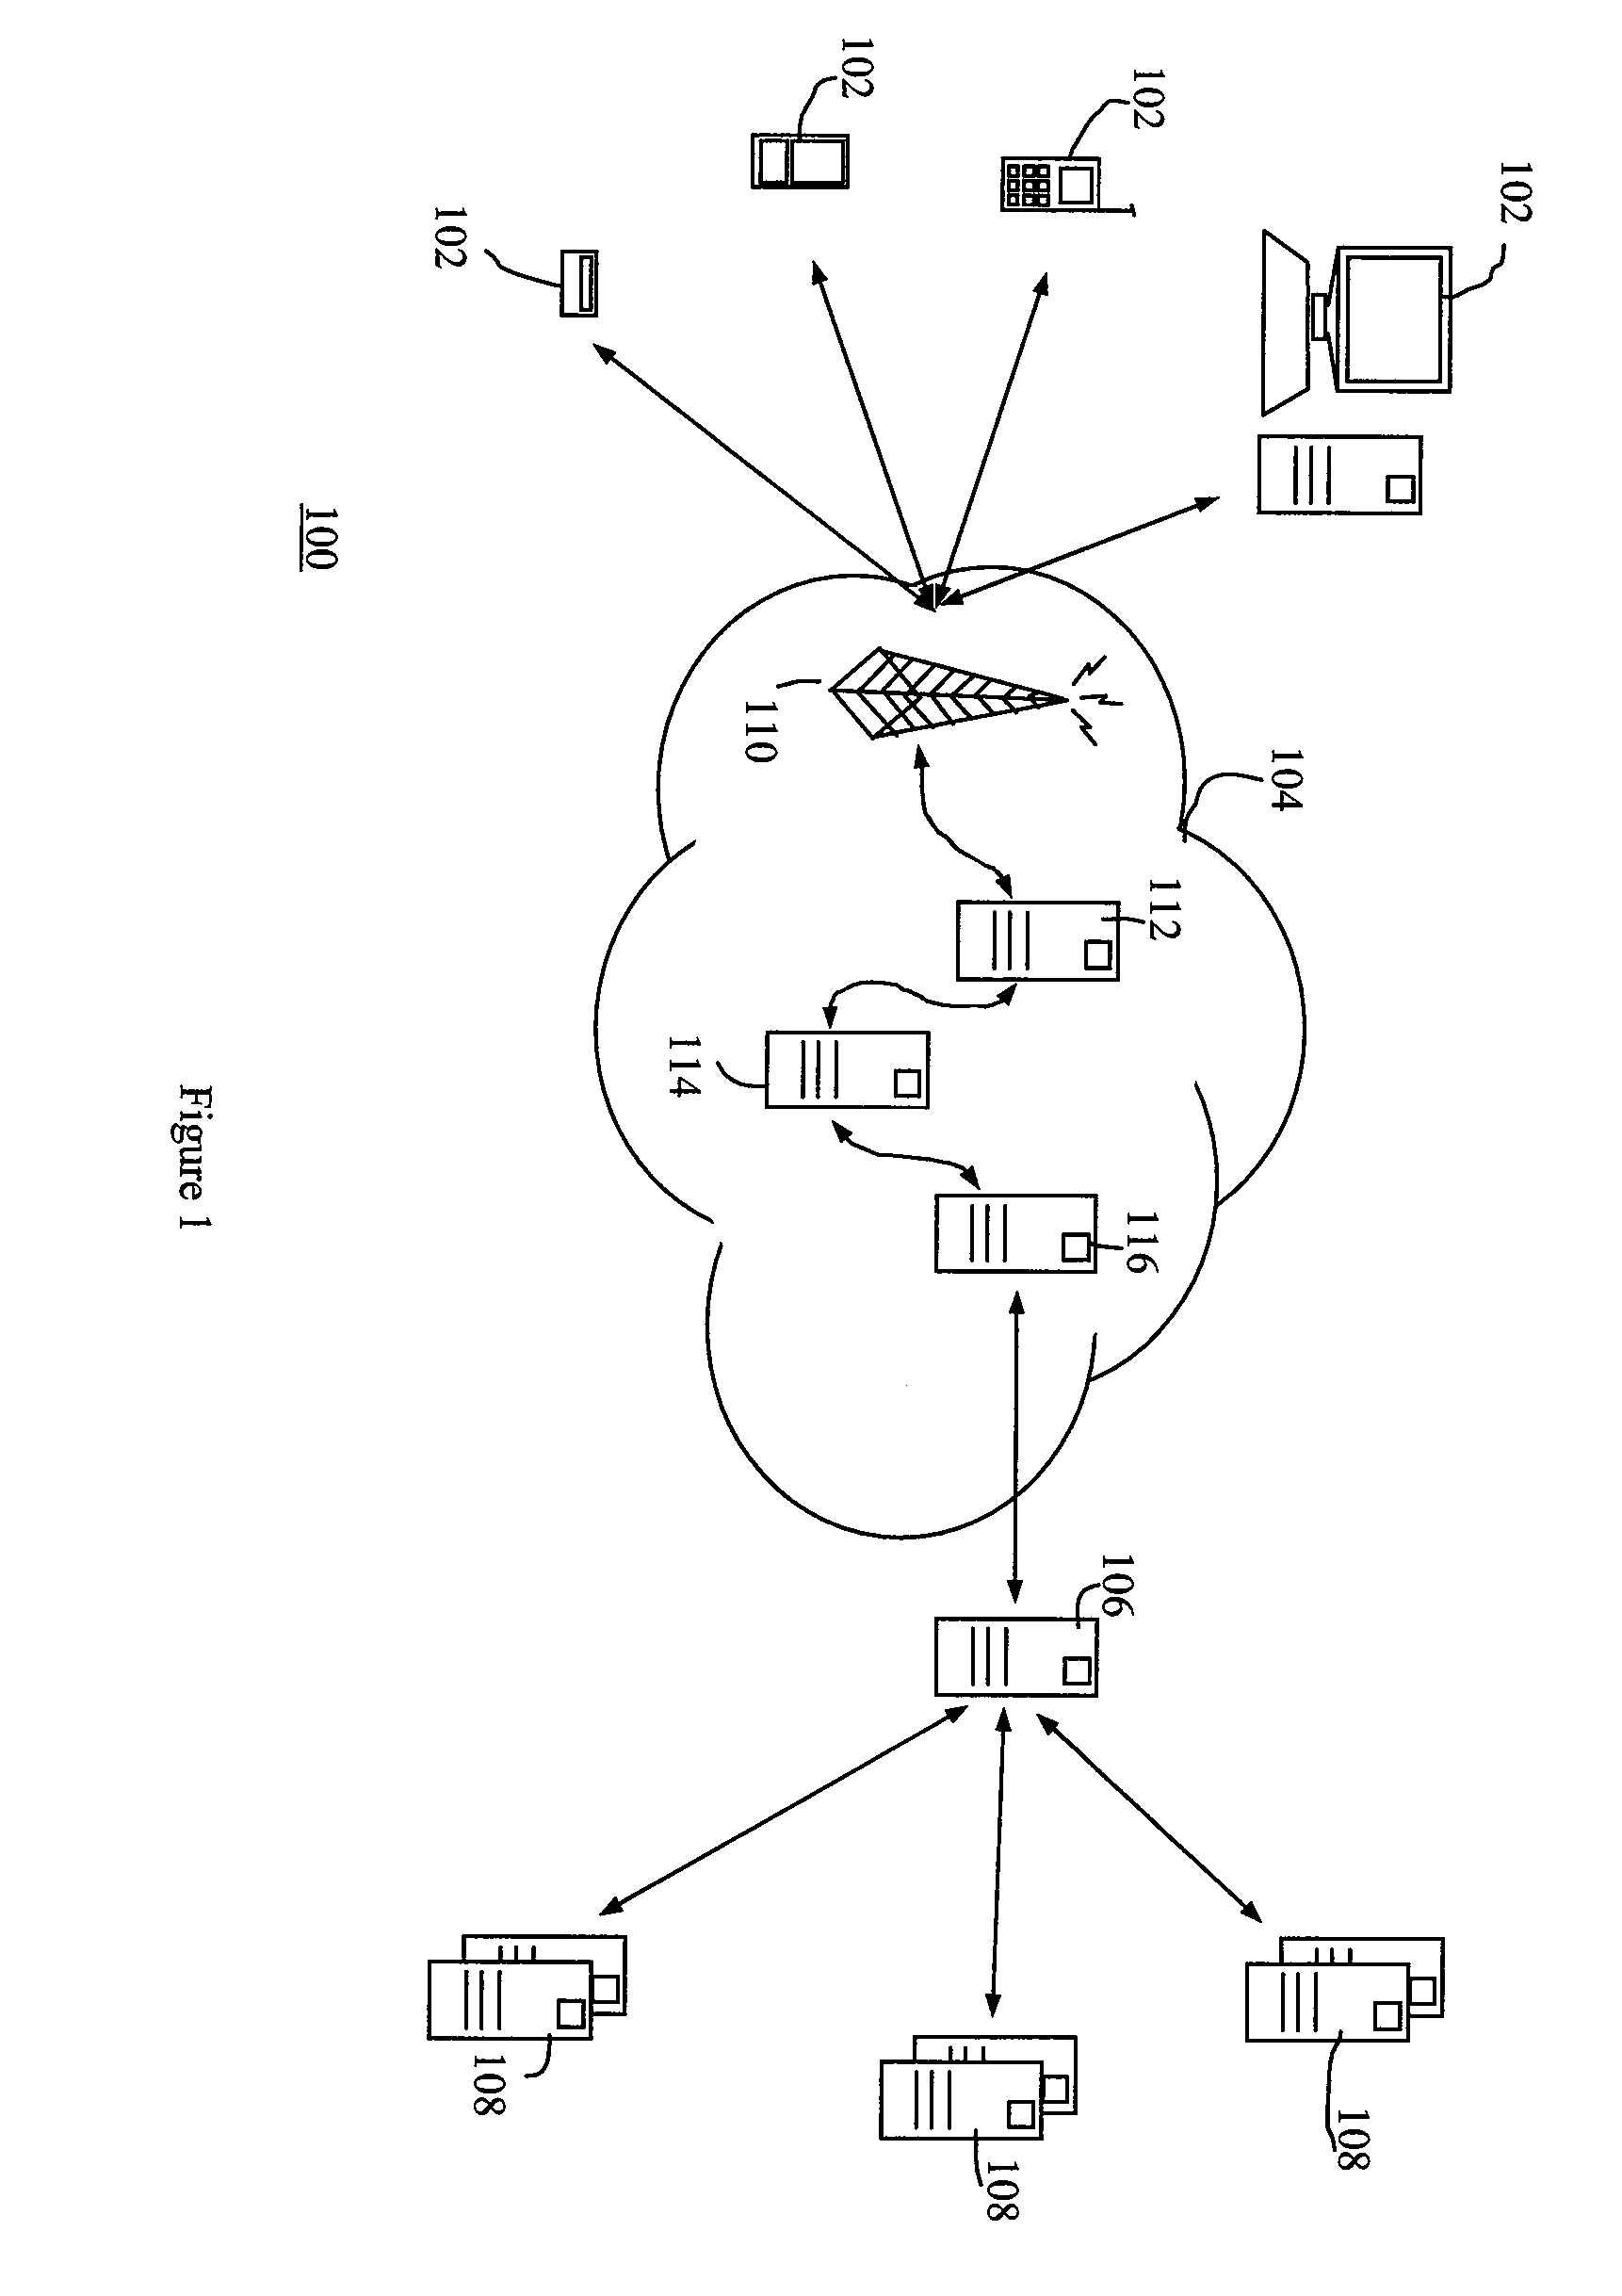 System and method for building mixed mode execution environment for component applications